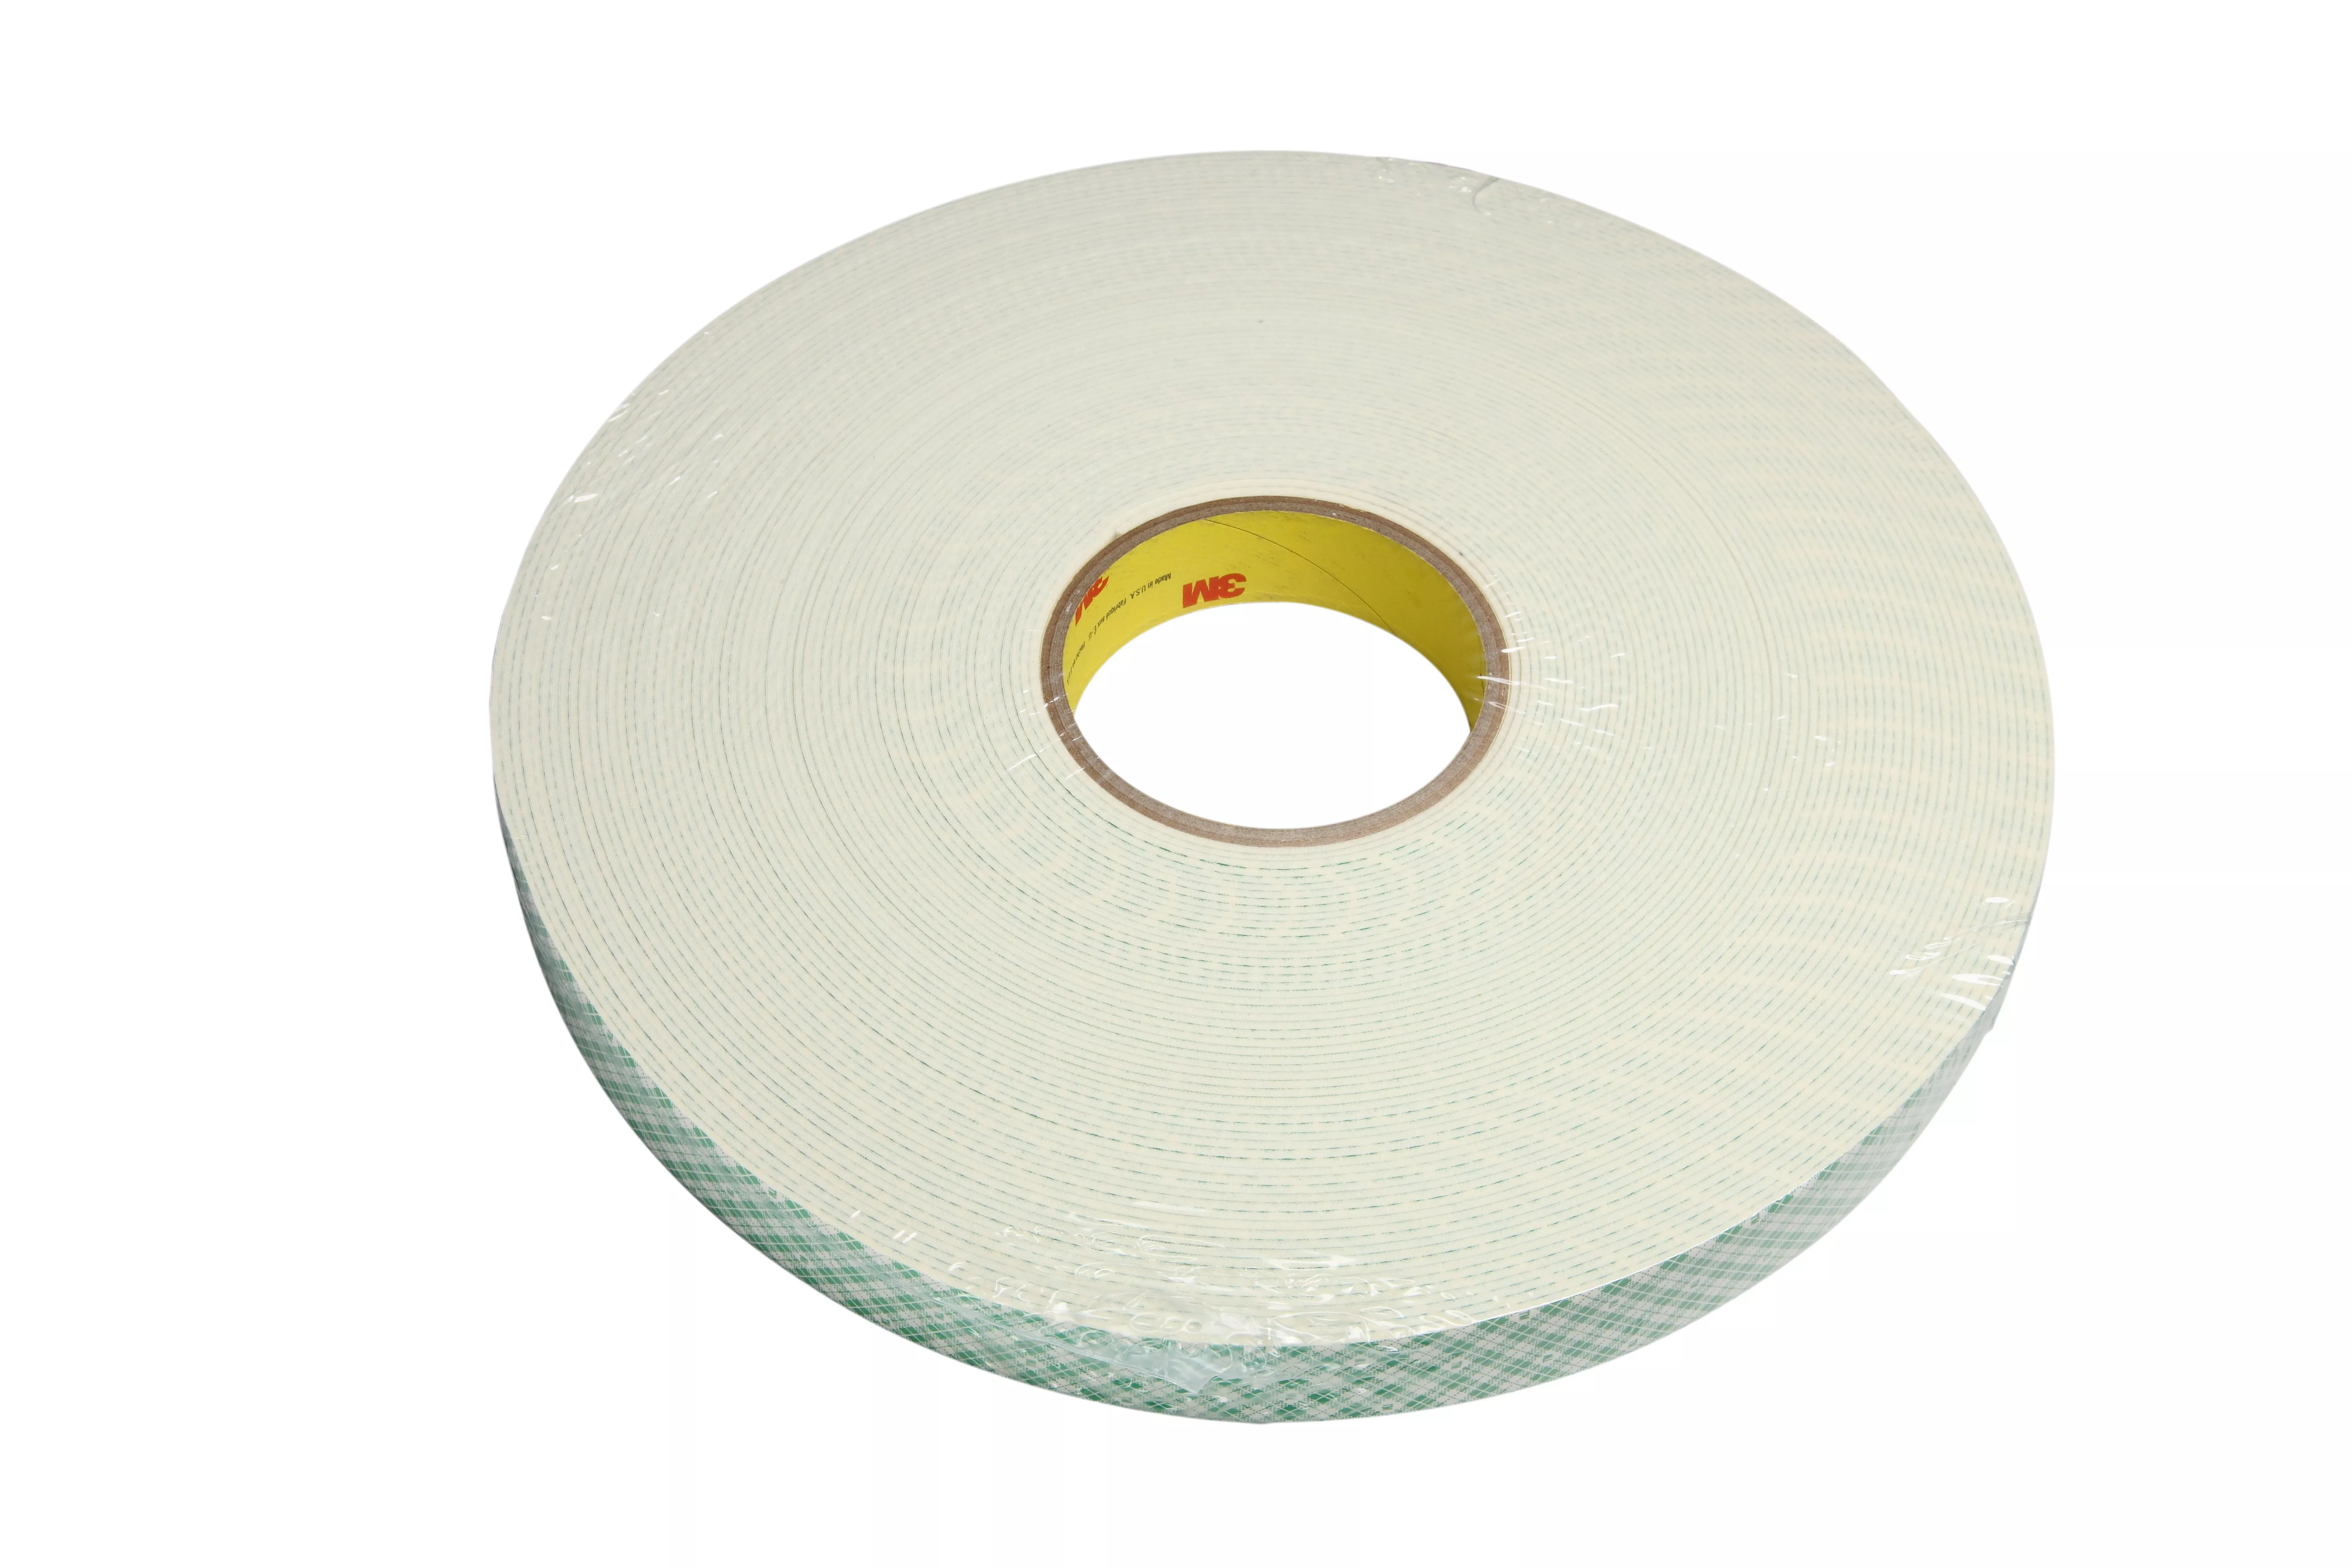 3M™ Urethane Foam Tape 4116, Natural, 1 in x 36 yd, 62 mil, 9 Roll/Case